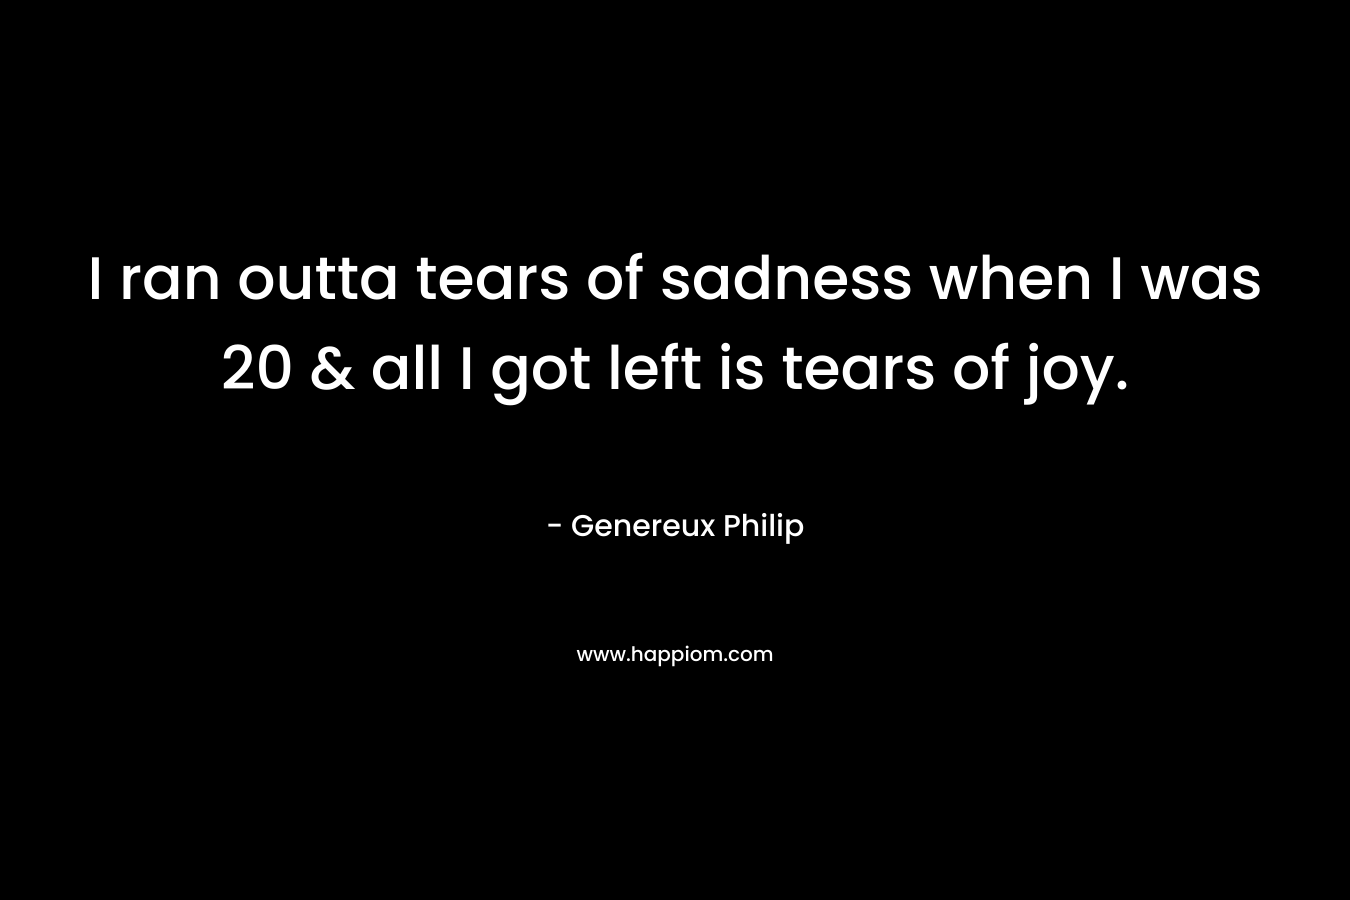 I ran outta tears of sadness when I was 20 & all I got left is tears of joy.